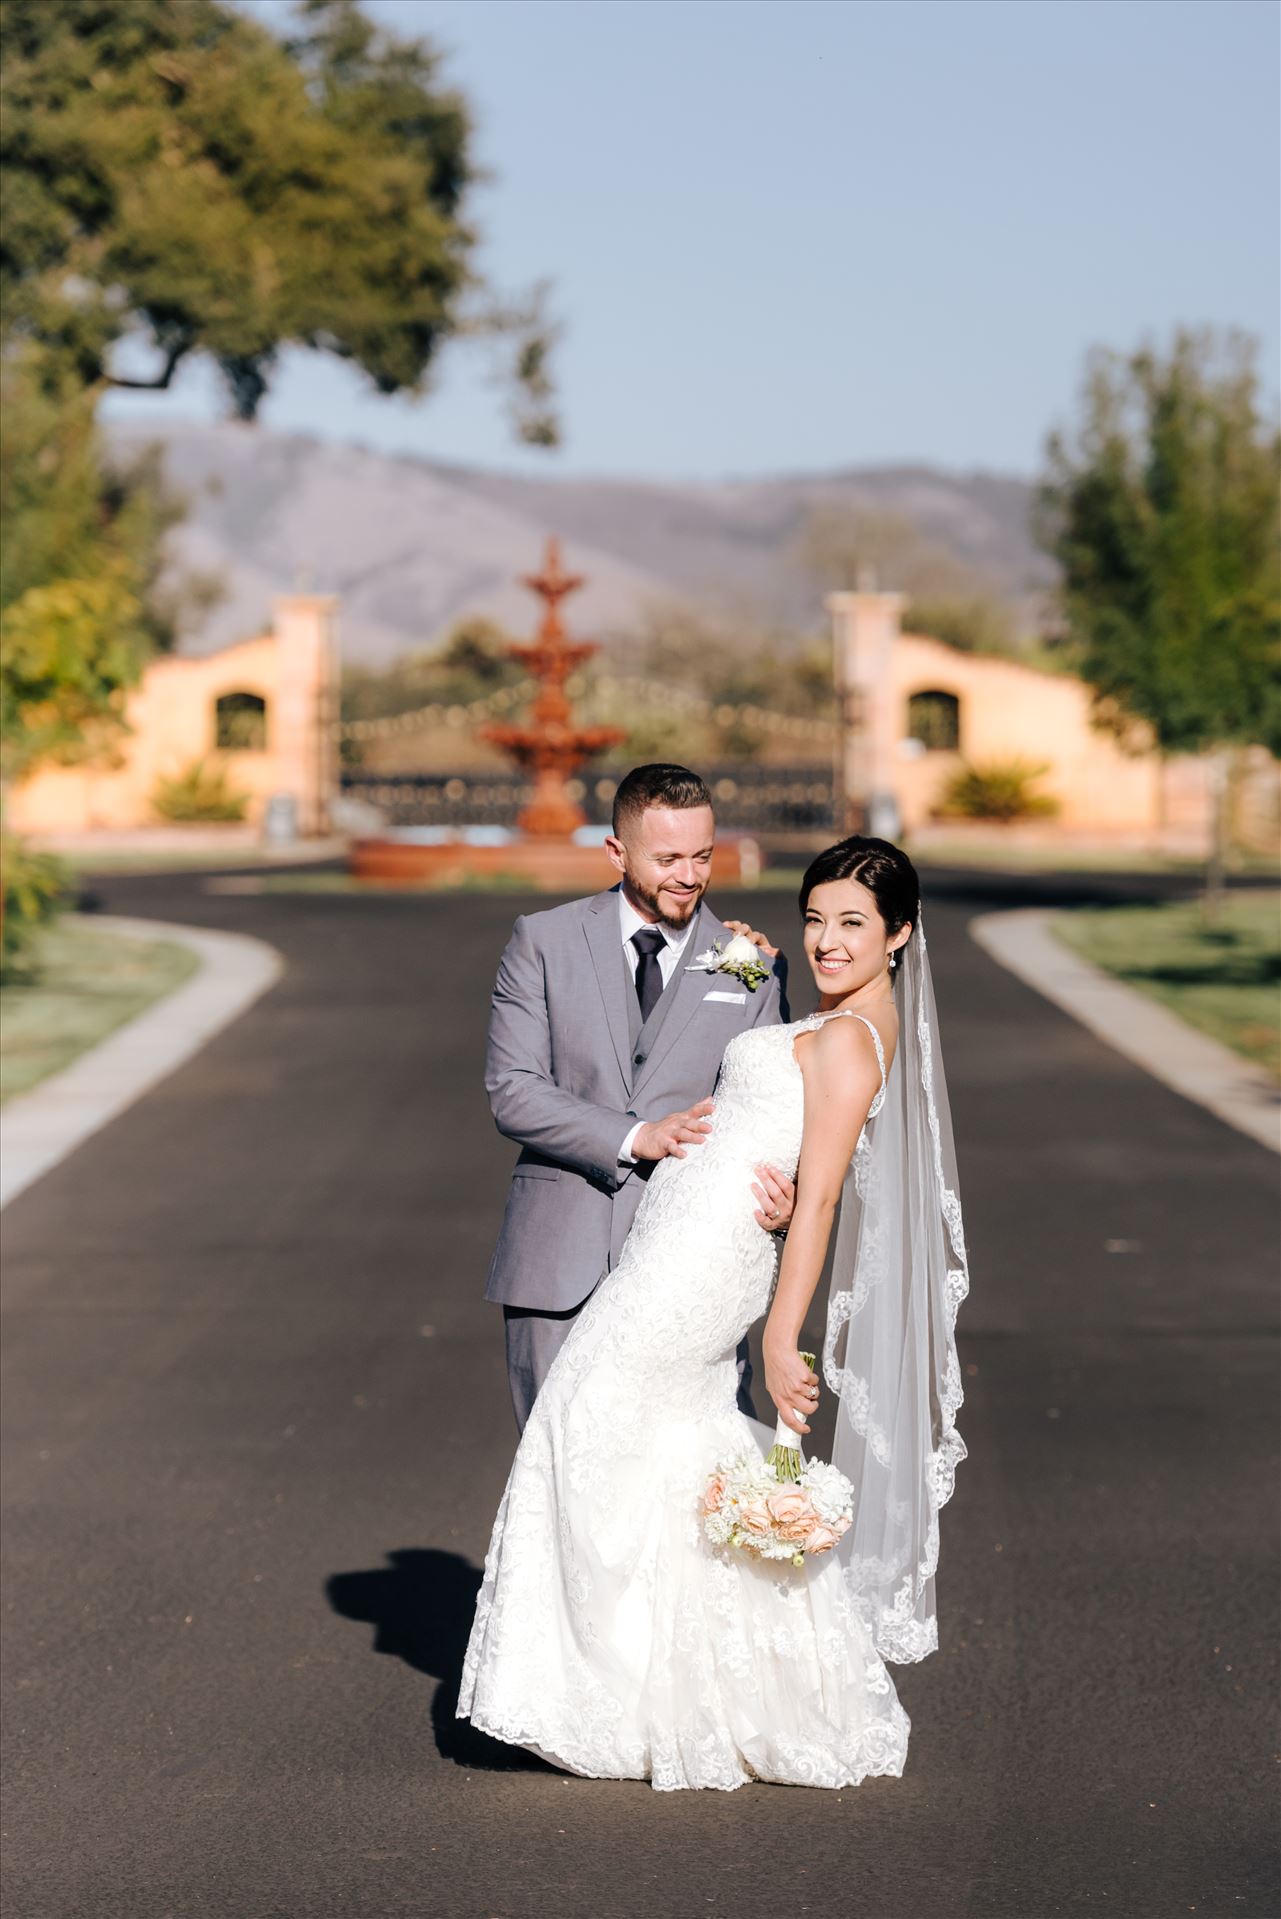 FW-5336.JPG Arroyo Grande California Country Chic and Elegant wedding by Mirror's Edge Photography, San Luis Obispo County Wedding Photographer.  Bride and Groom at A&C Ranch. by Sarah Williams